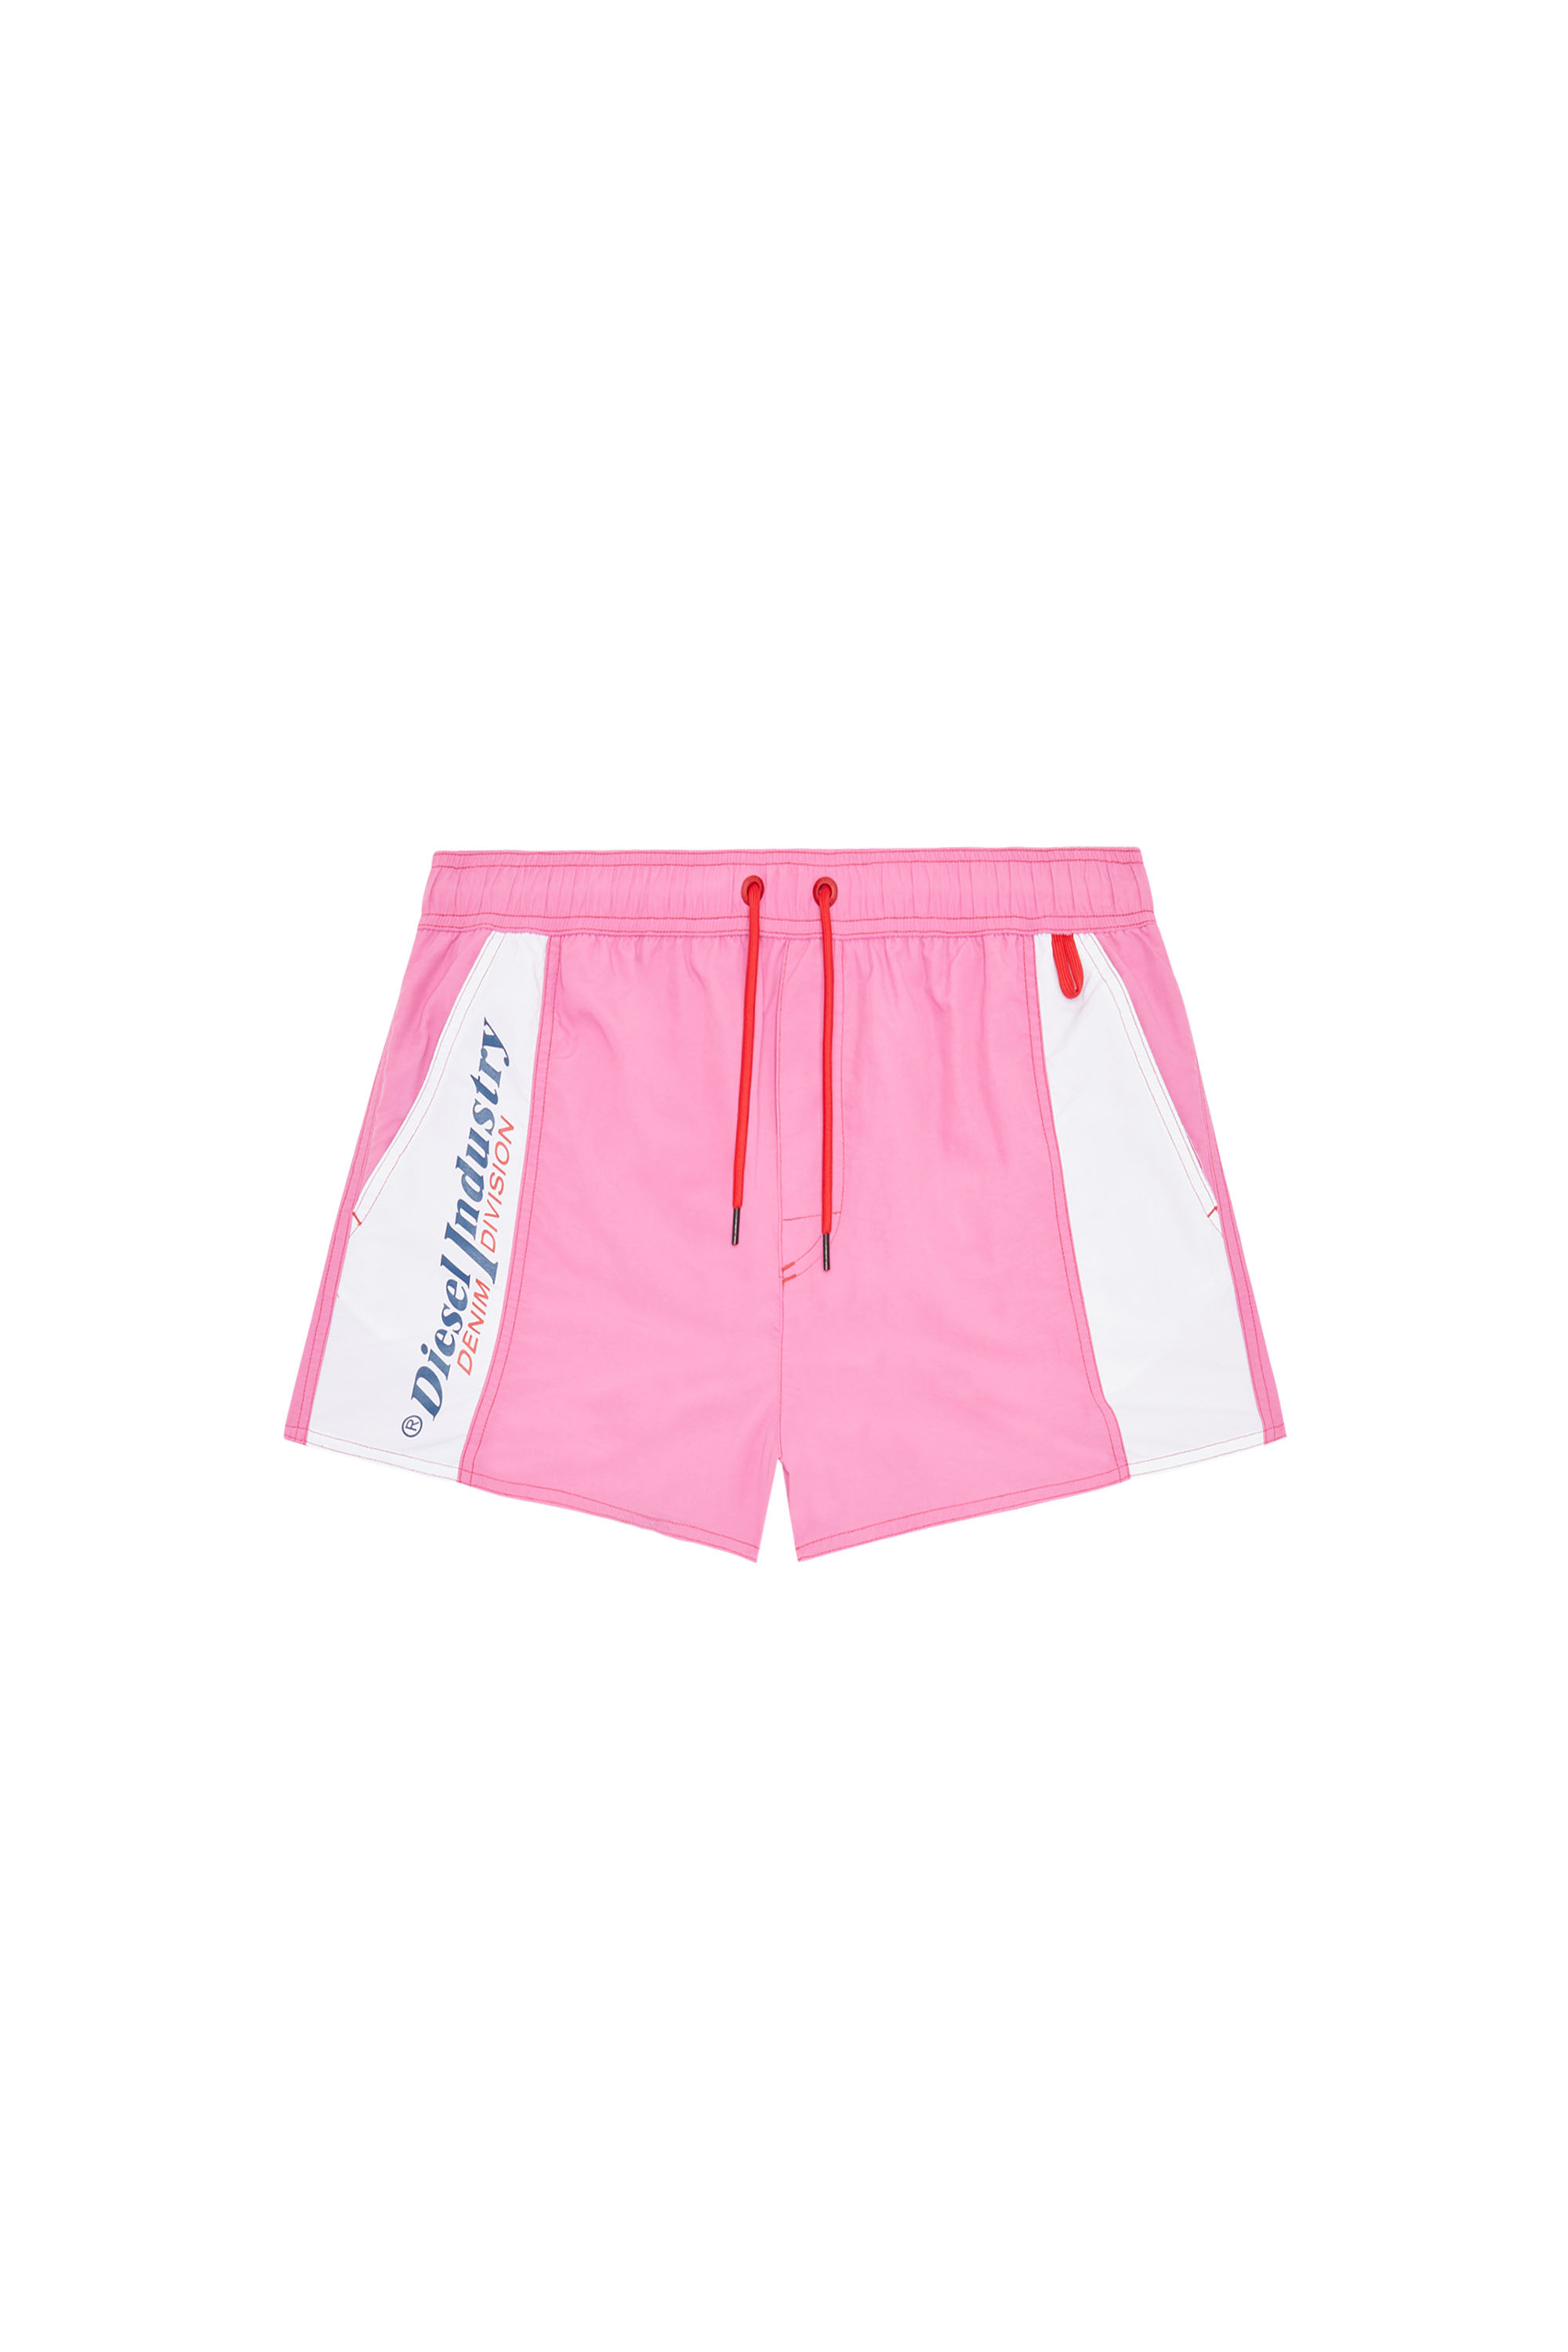 Diesel Swim Shorts With Side Panels In Pink